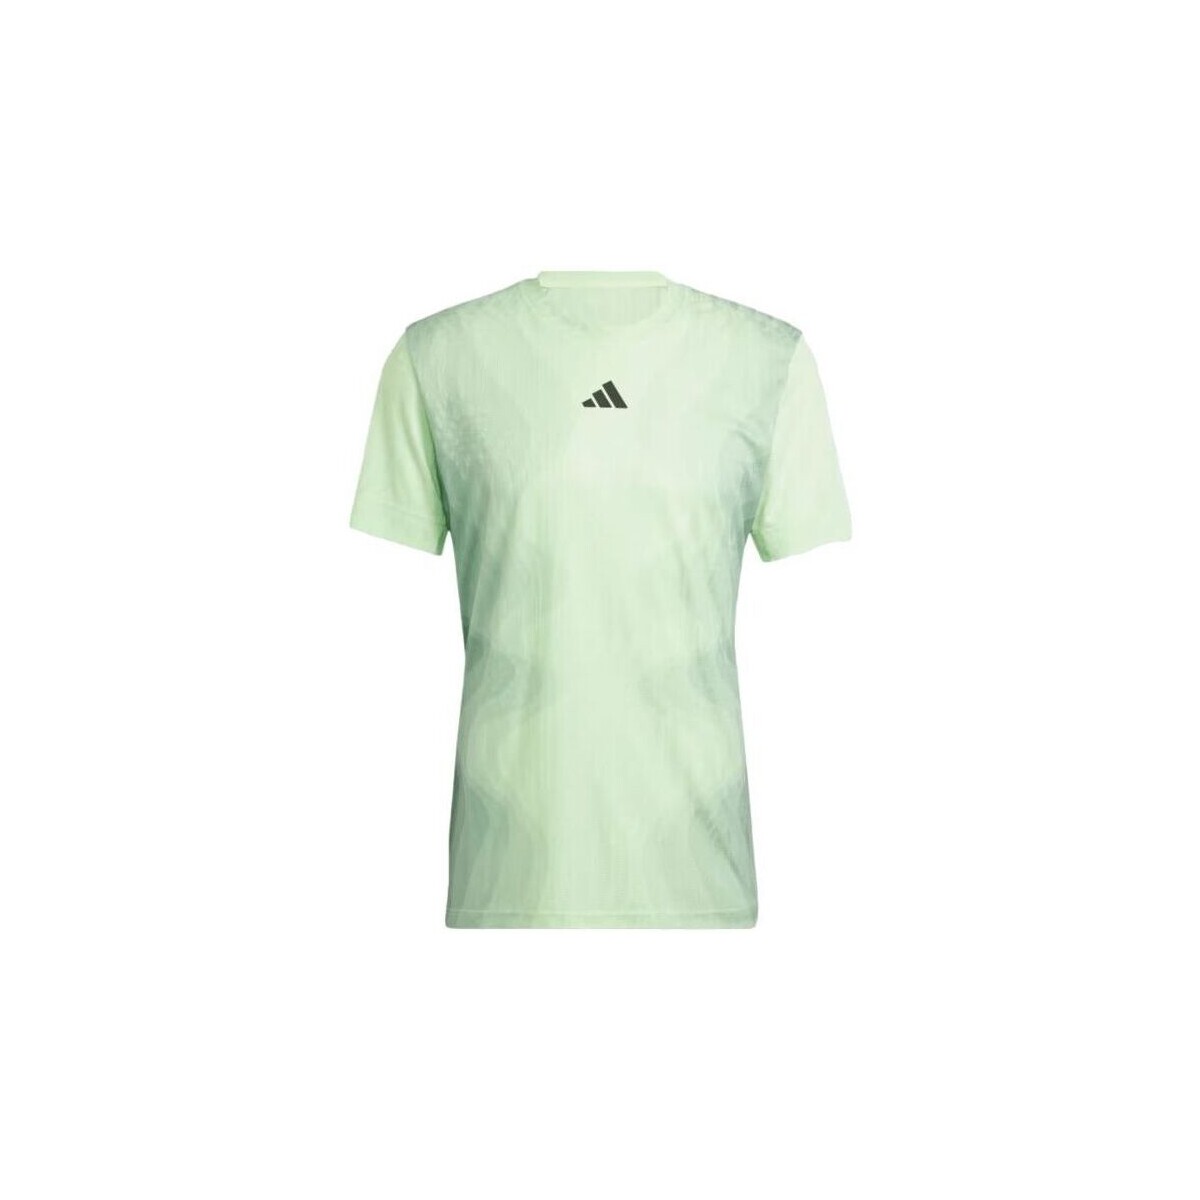 Vêtements Homme When Will the adidas Boost 350 V2 MX Rock to Arrive T-shirt Airchill Pro Freelift Homme Semi Green Spark Jaune